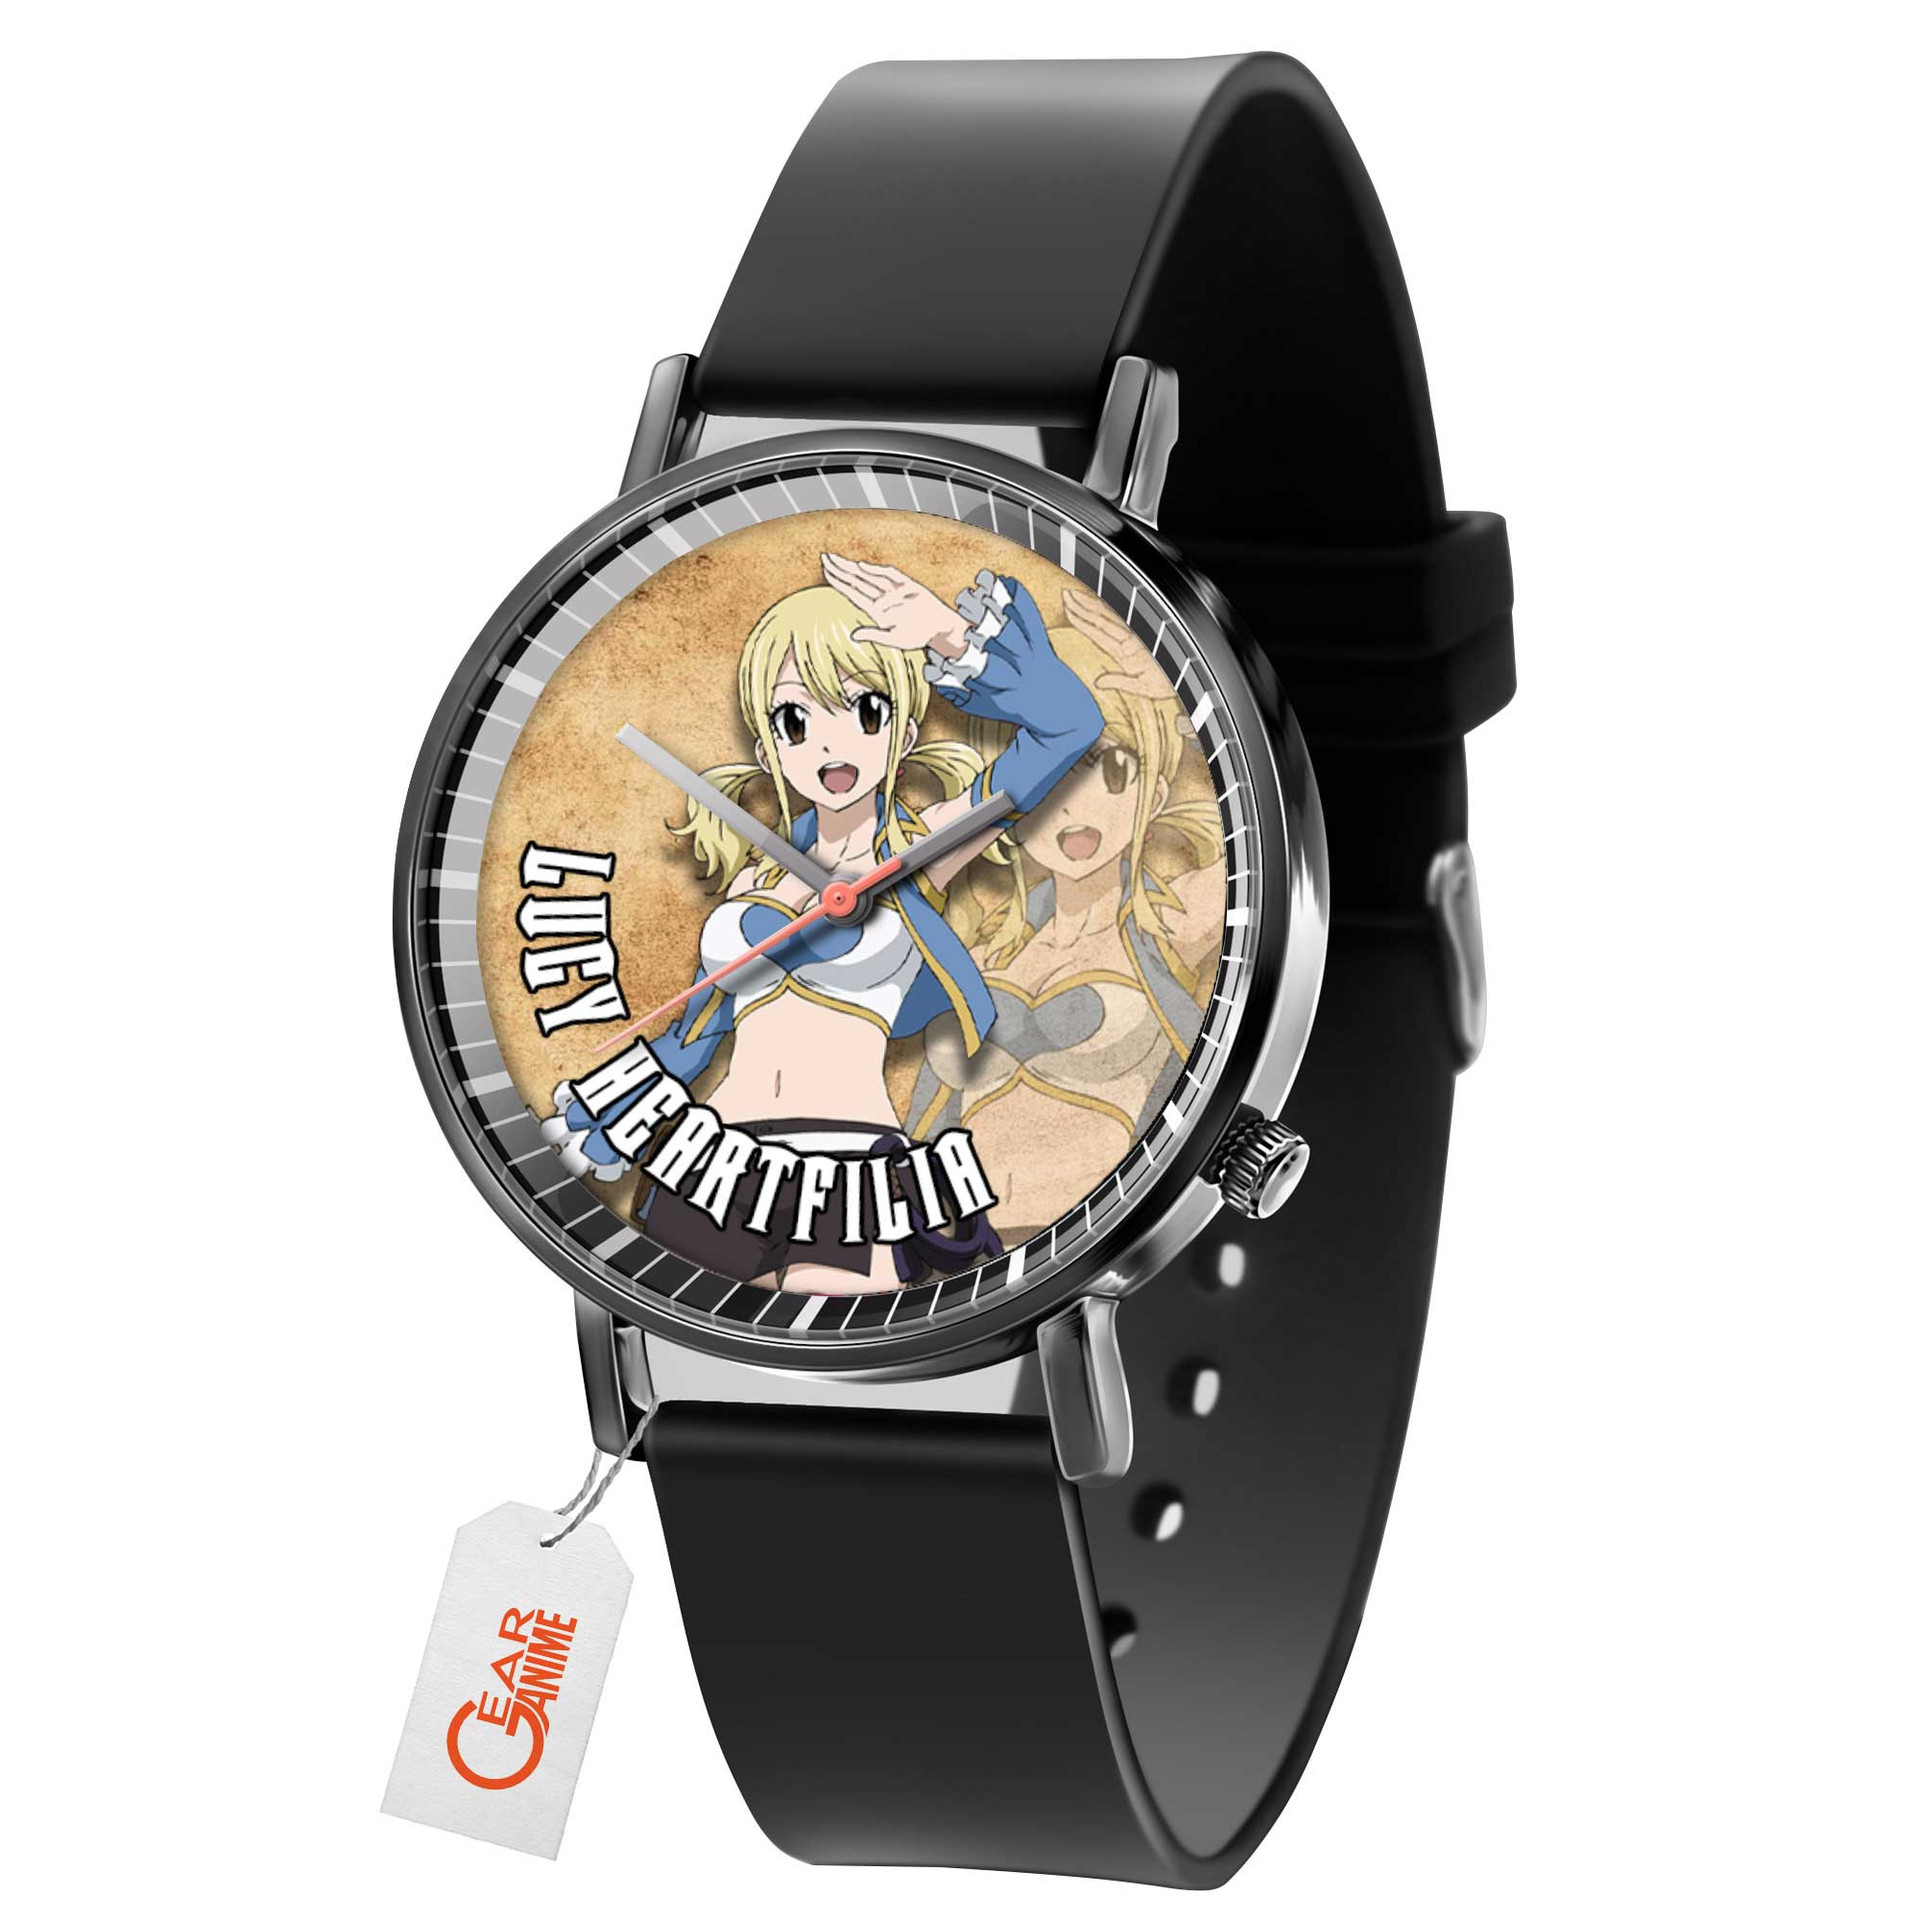 Lucy Heartfillia Leather Band Wrist Watch Personalized-Gear Anime